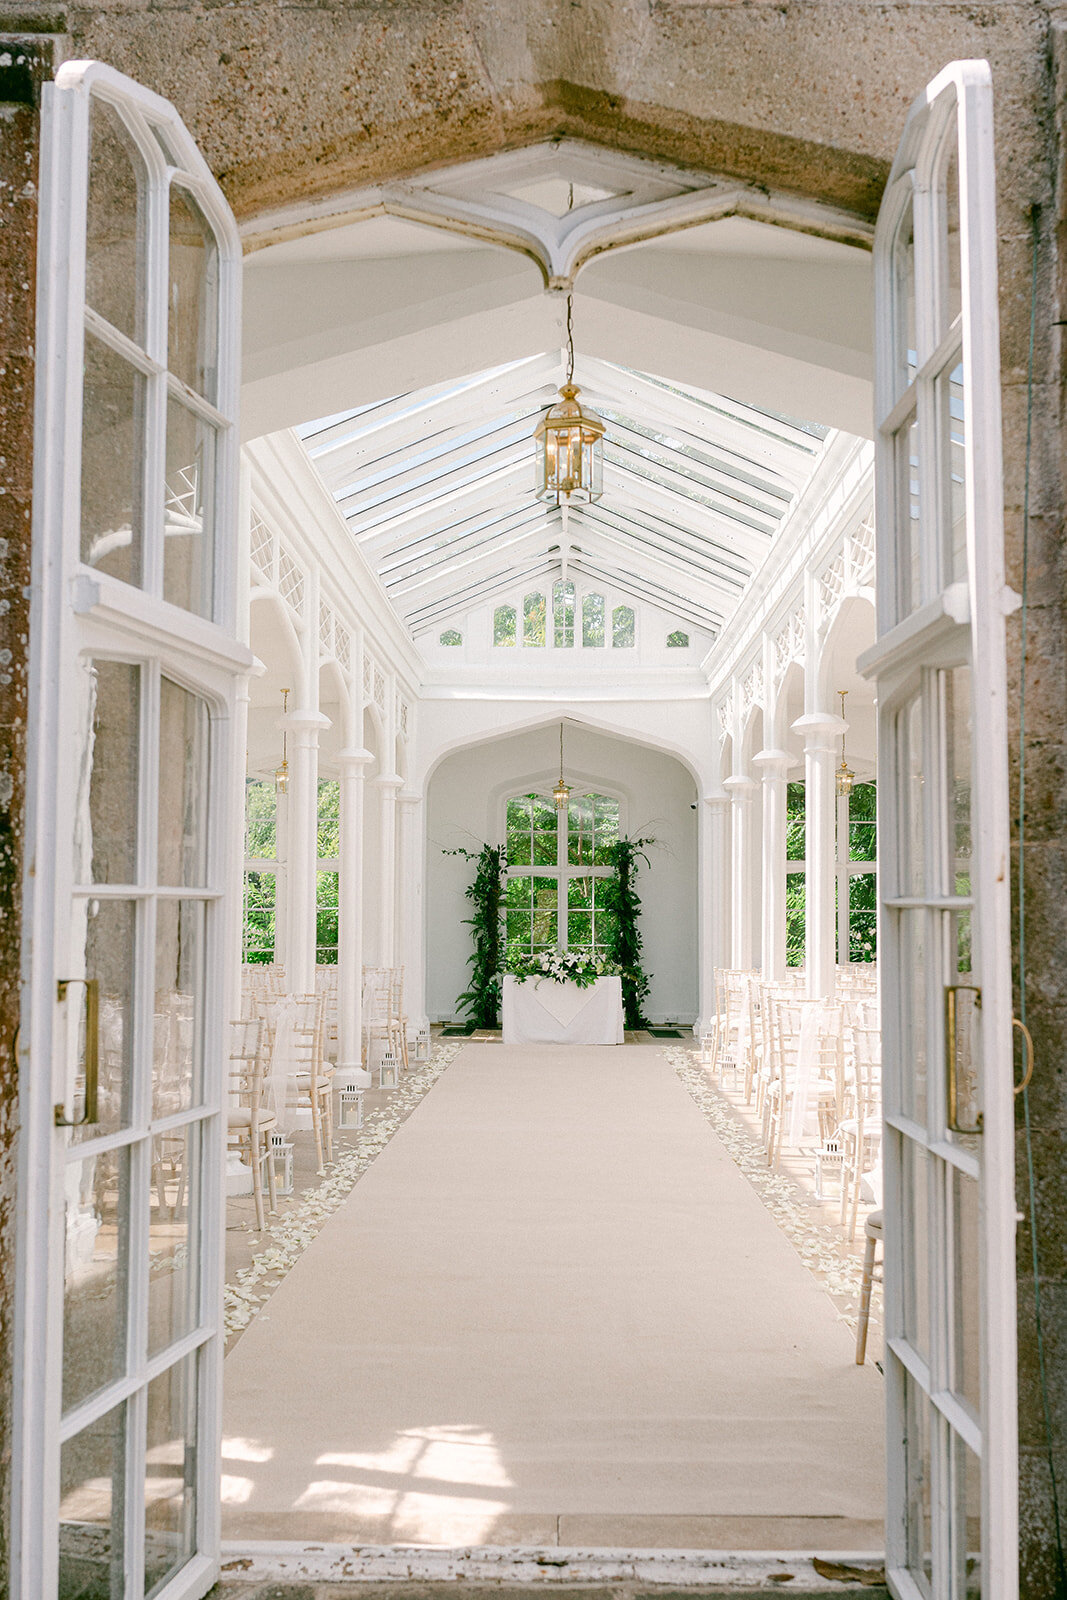 Image of the Orangery at St Audries Park taunton